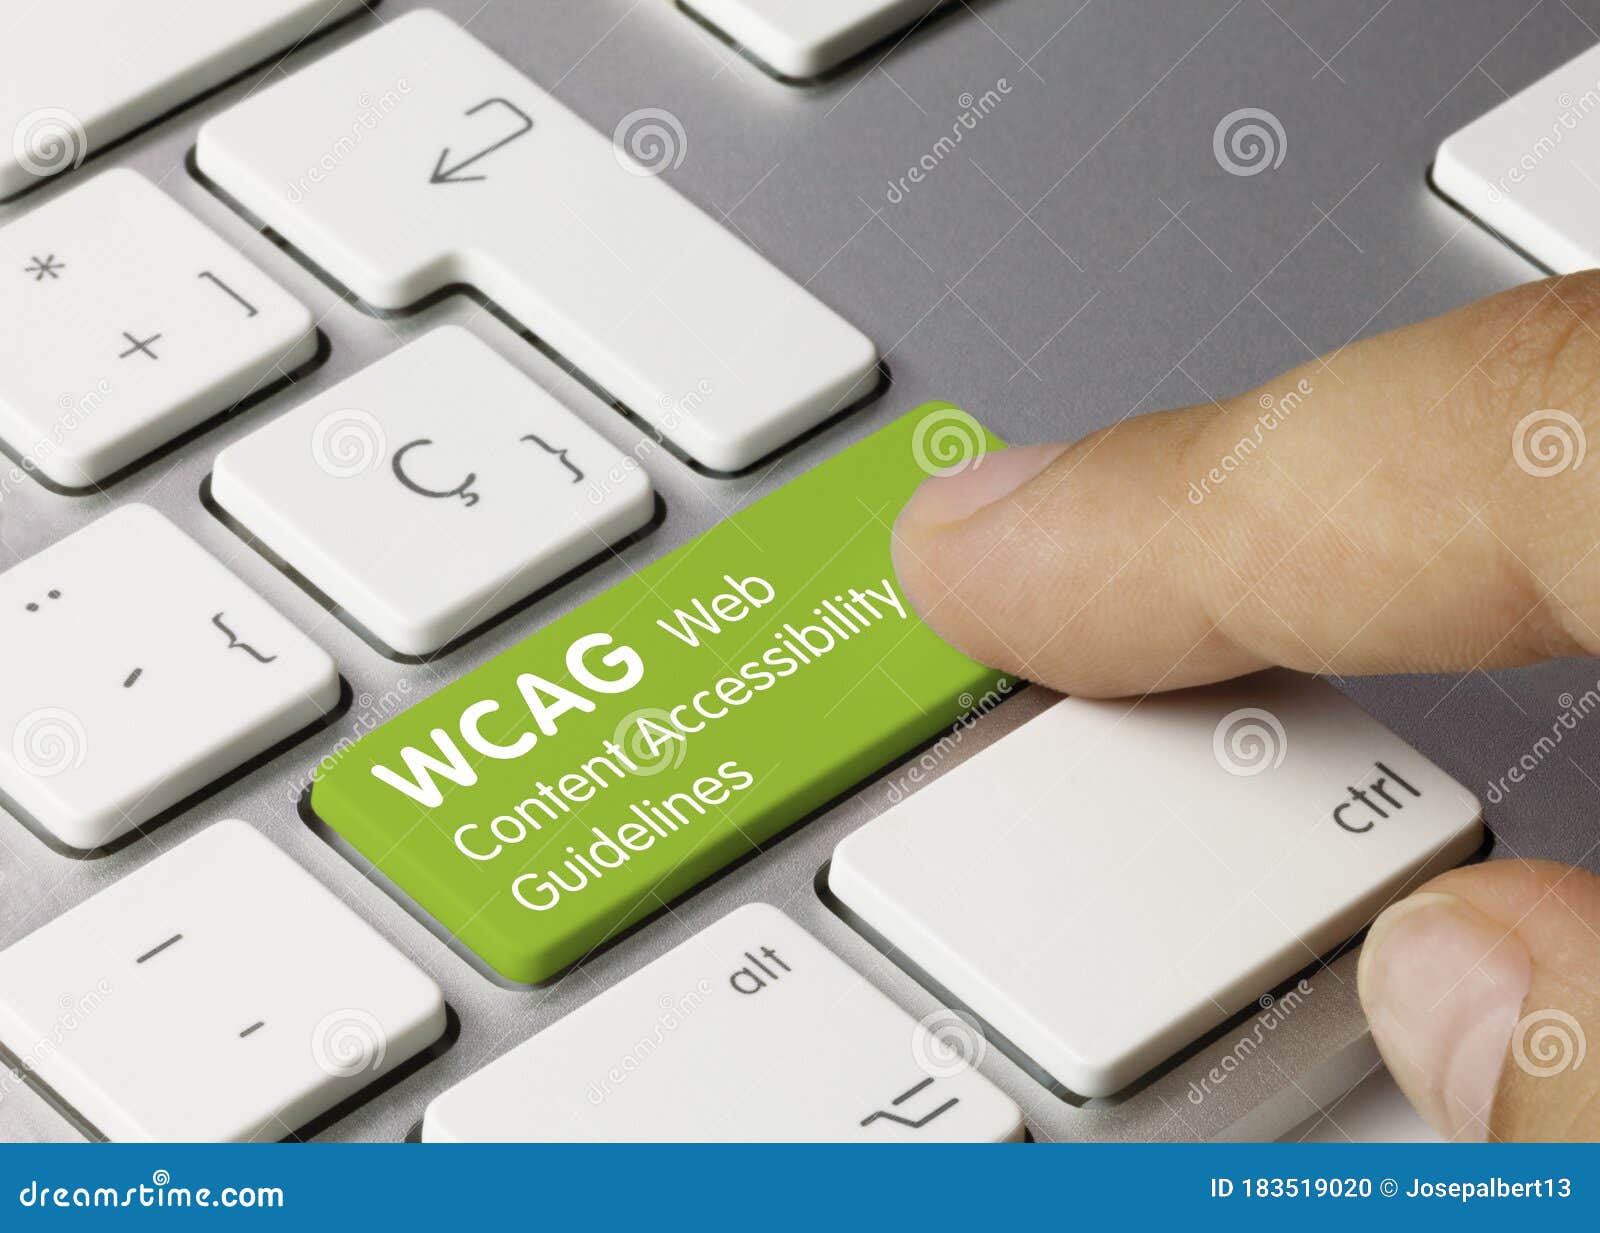 wcag web content accessibility guidelines - inscription on green keyboard key